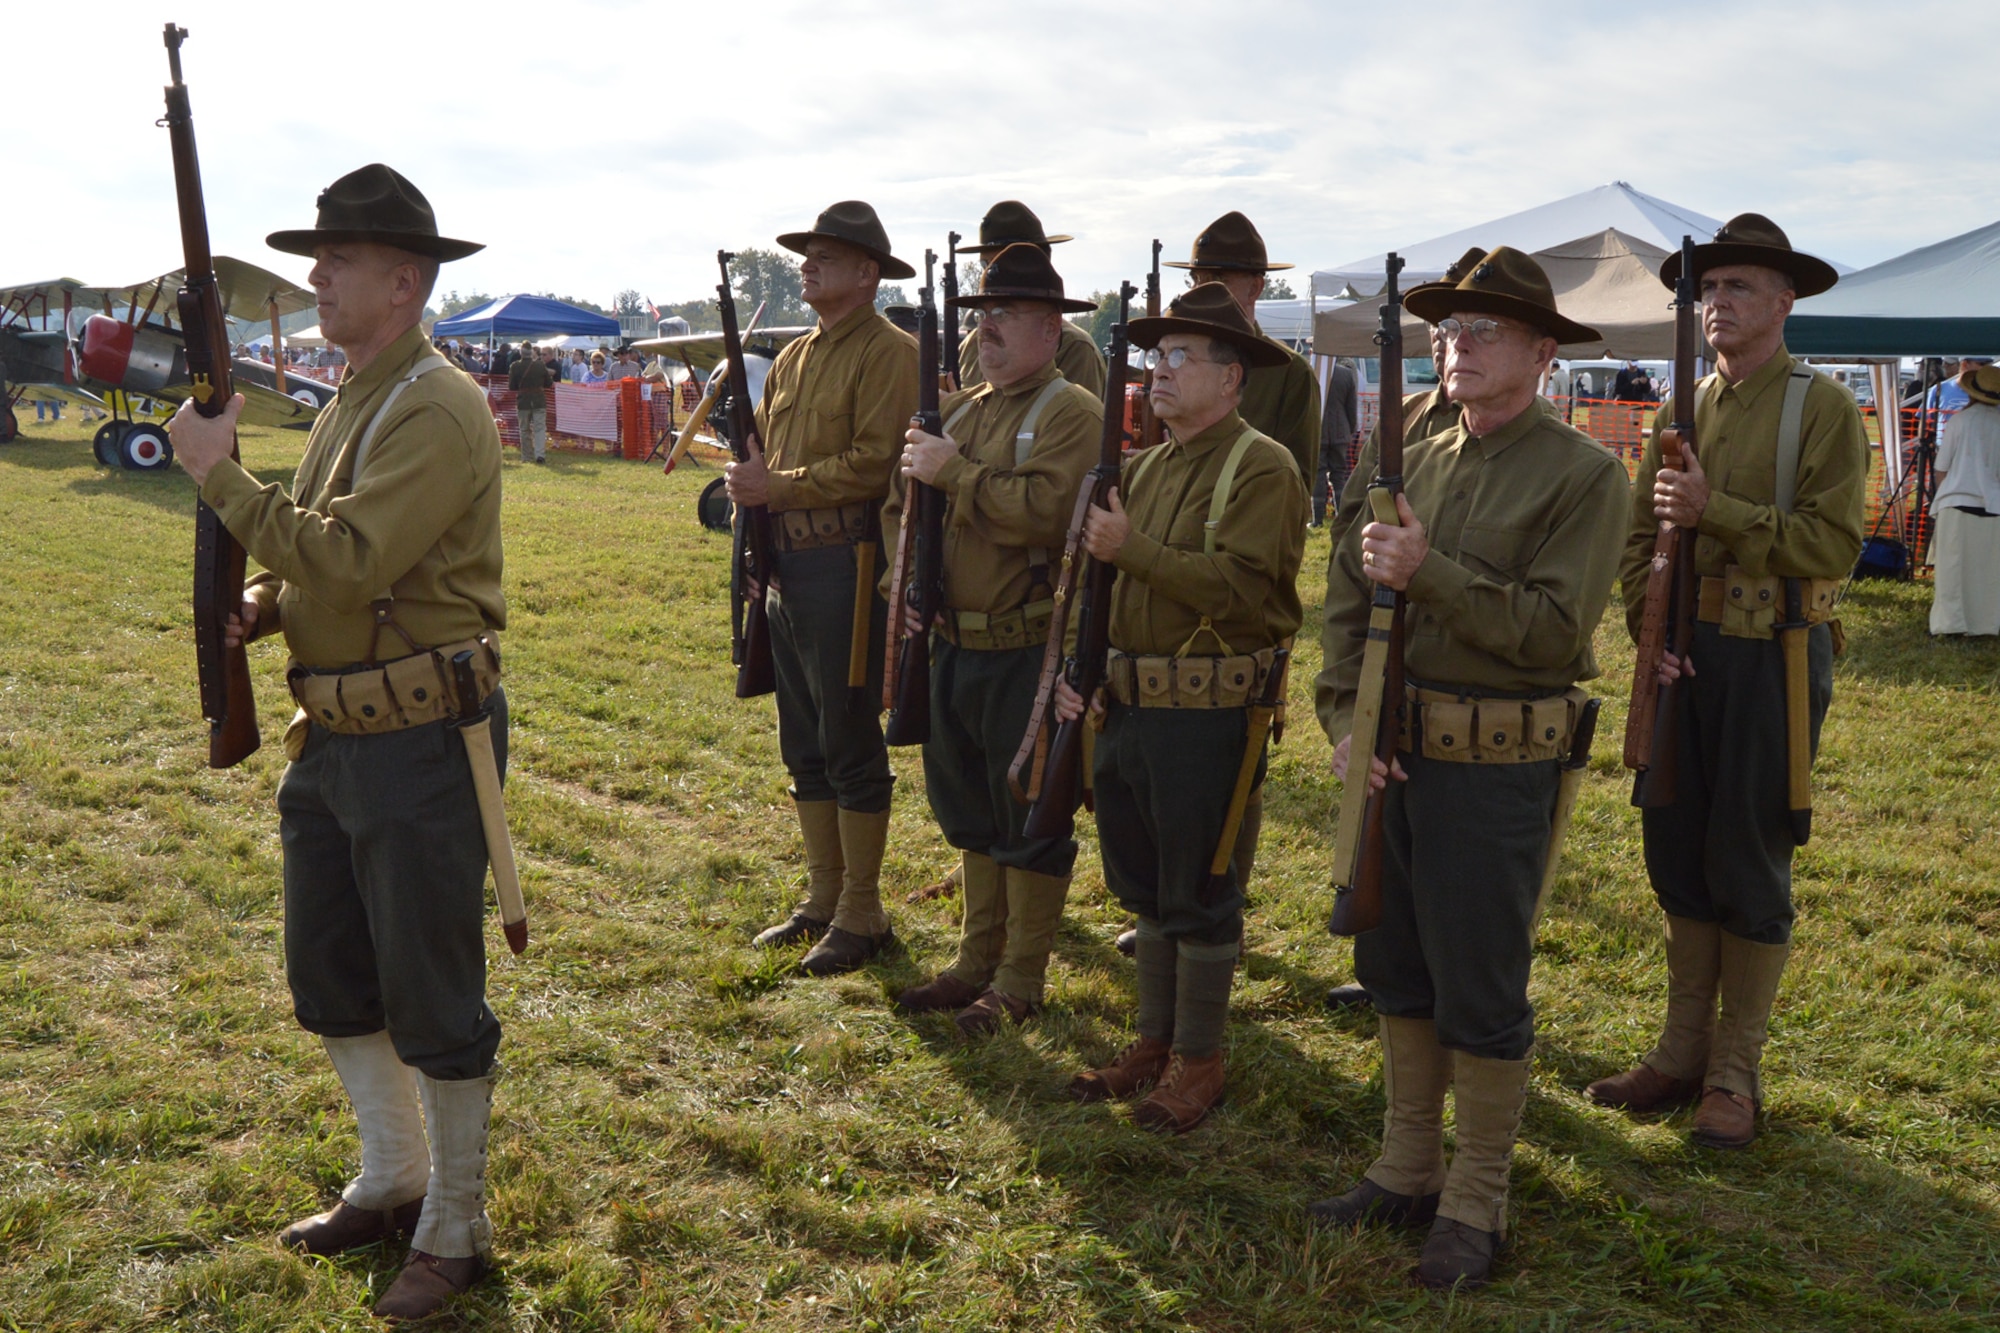 DAYTON, Ohio -- Visitors encountered more than 60 re-enactors performing skits in a war encampment during the Ninth WWI Dawn Patrol Rendezvous on Sept. 27-28, 2014. (U.S. Air Force photo)